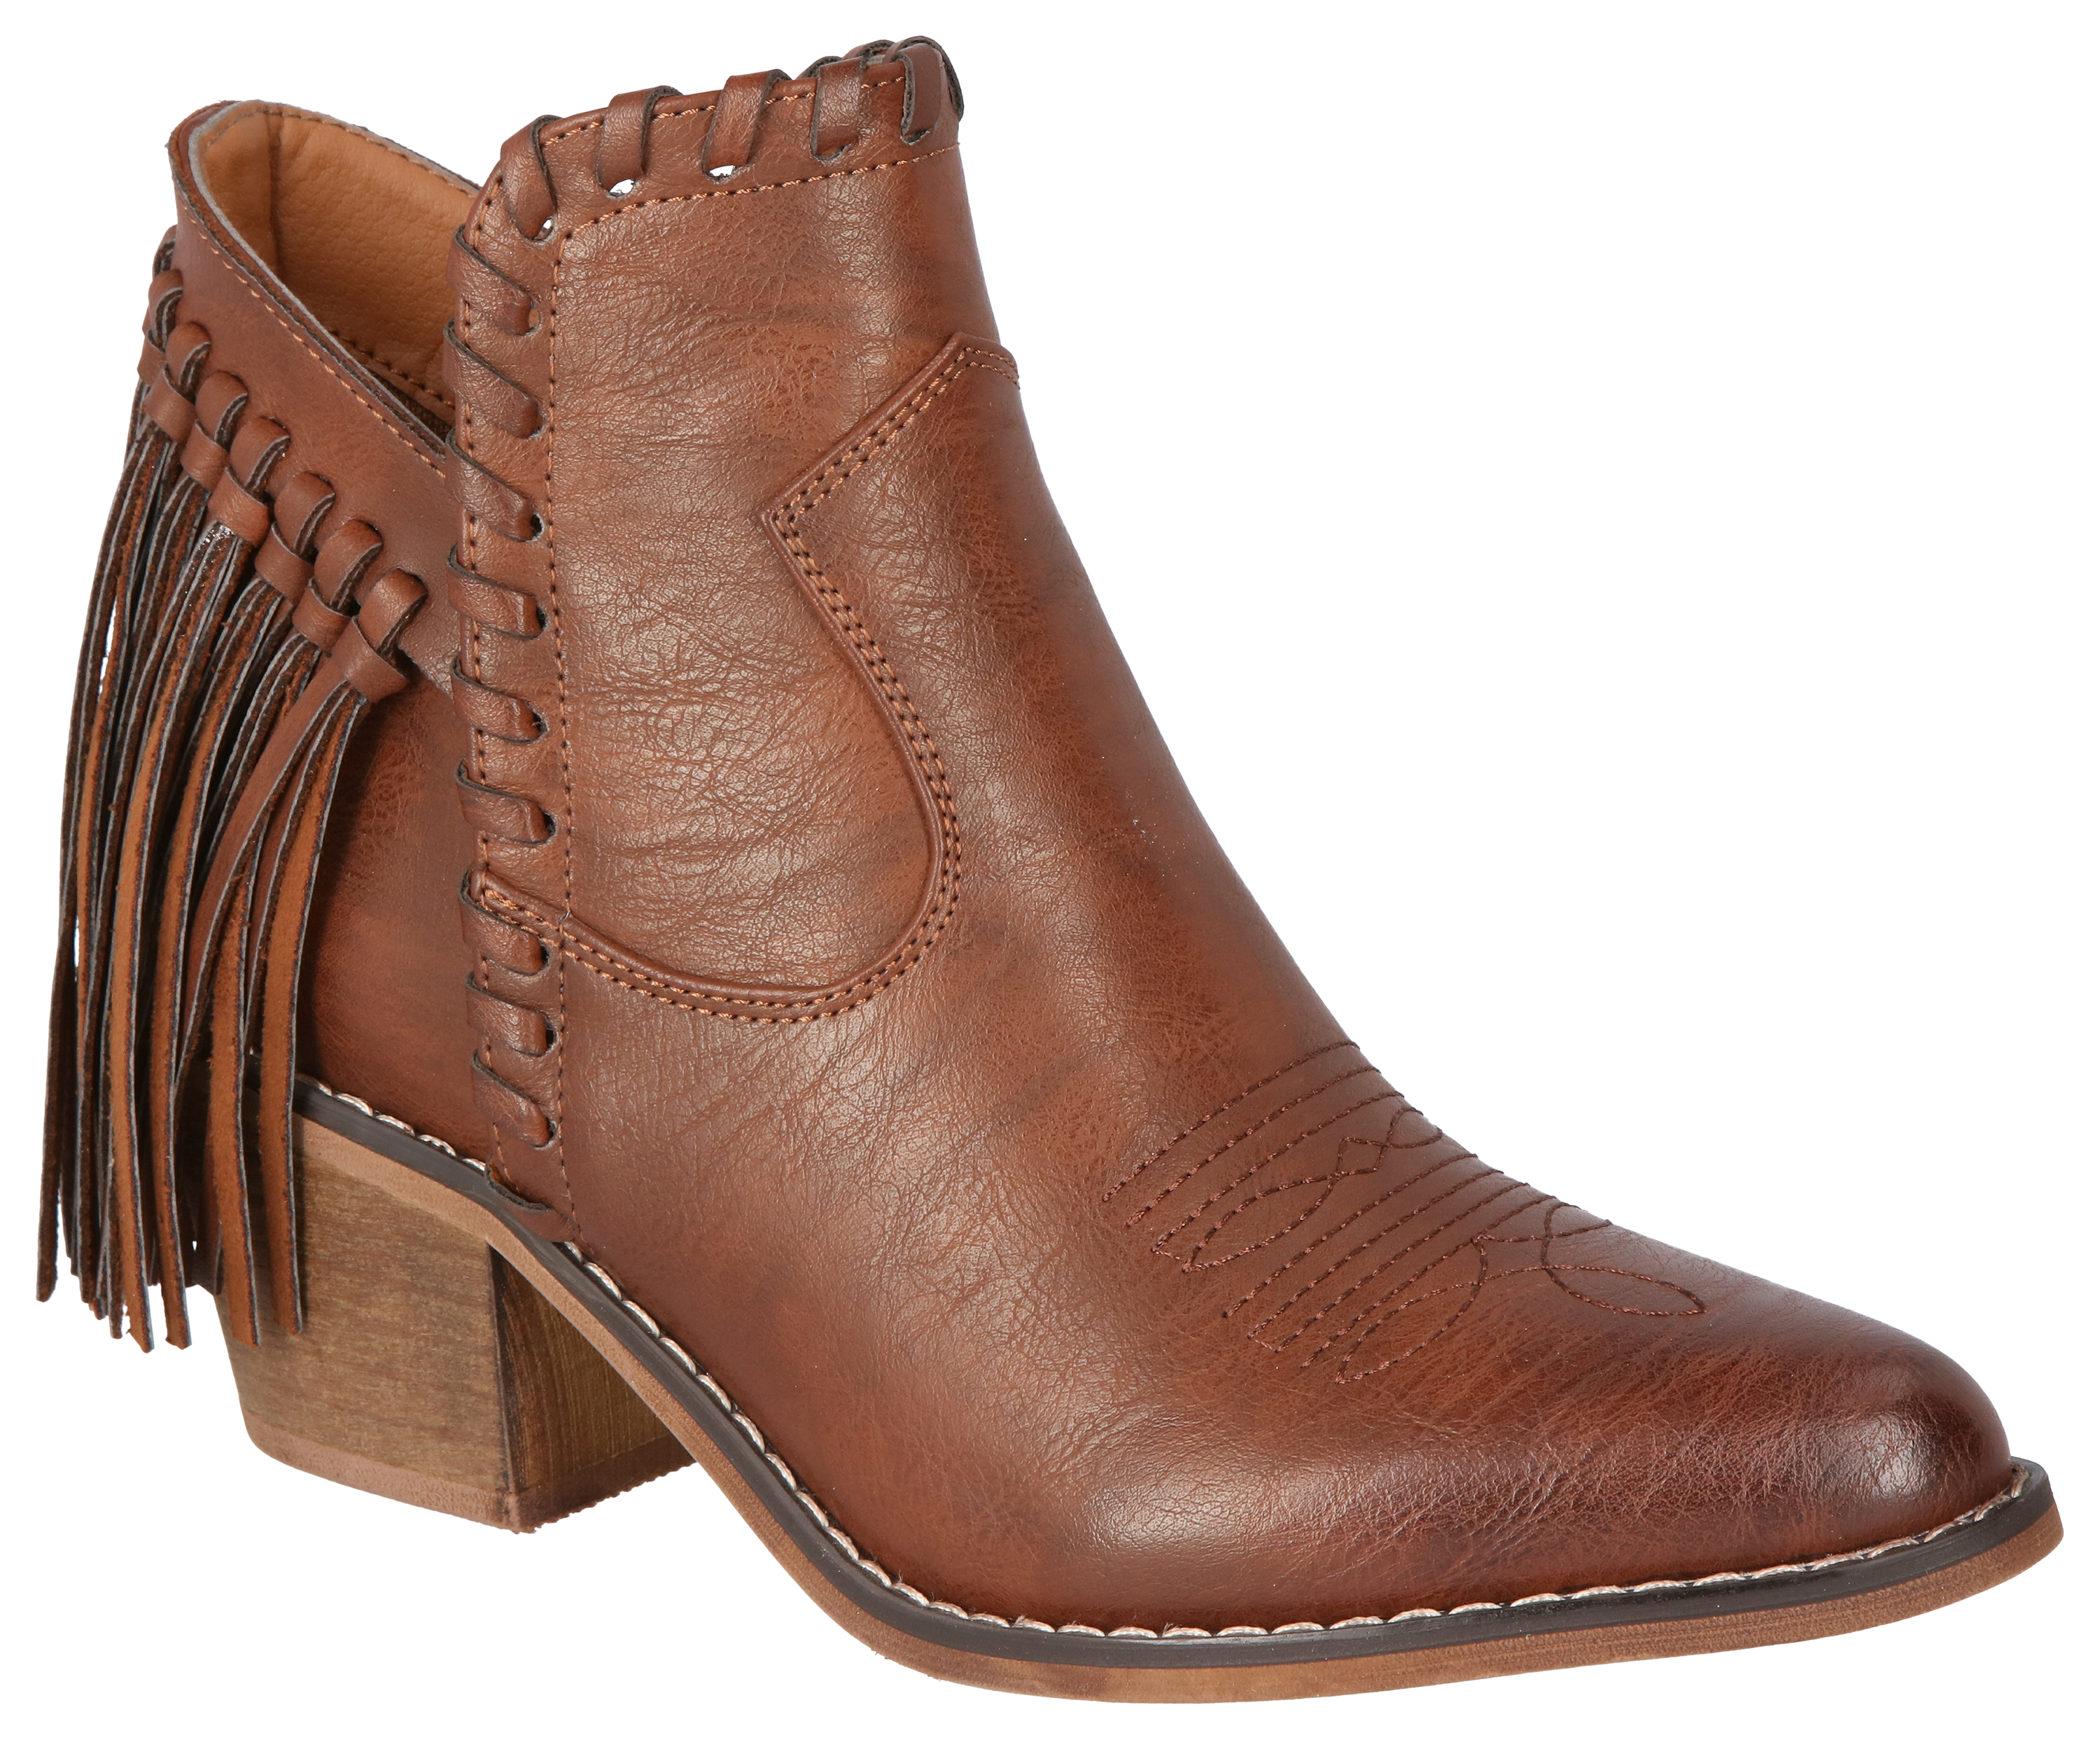 Natural Reflections Keykee Tassel Boots for Ladies - Whiskey - 7.5M